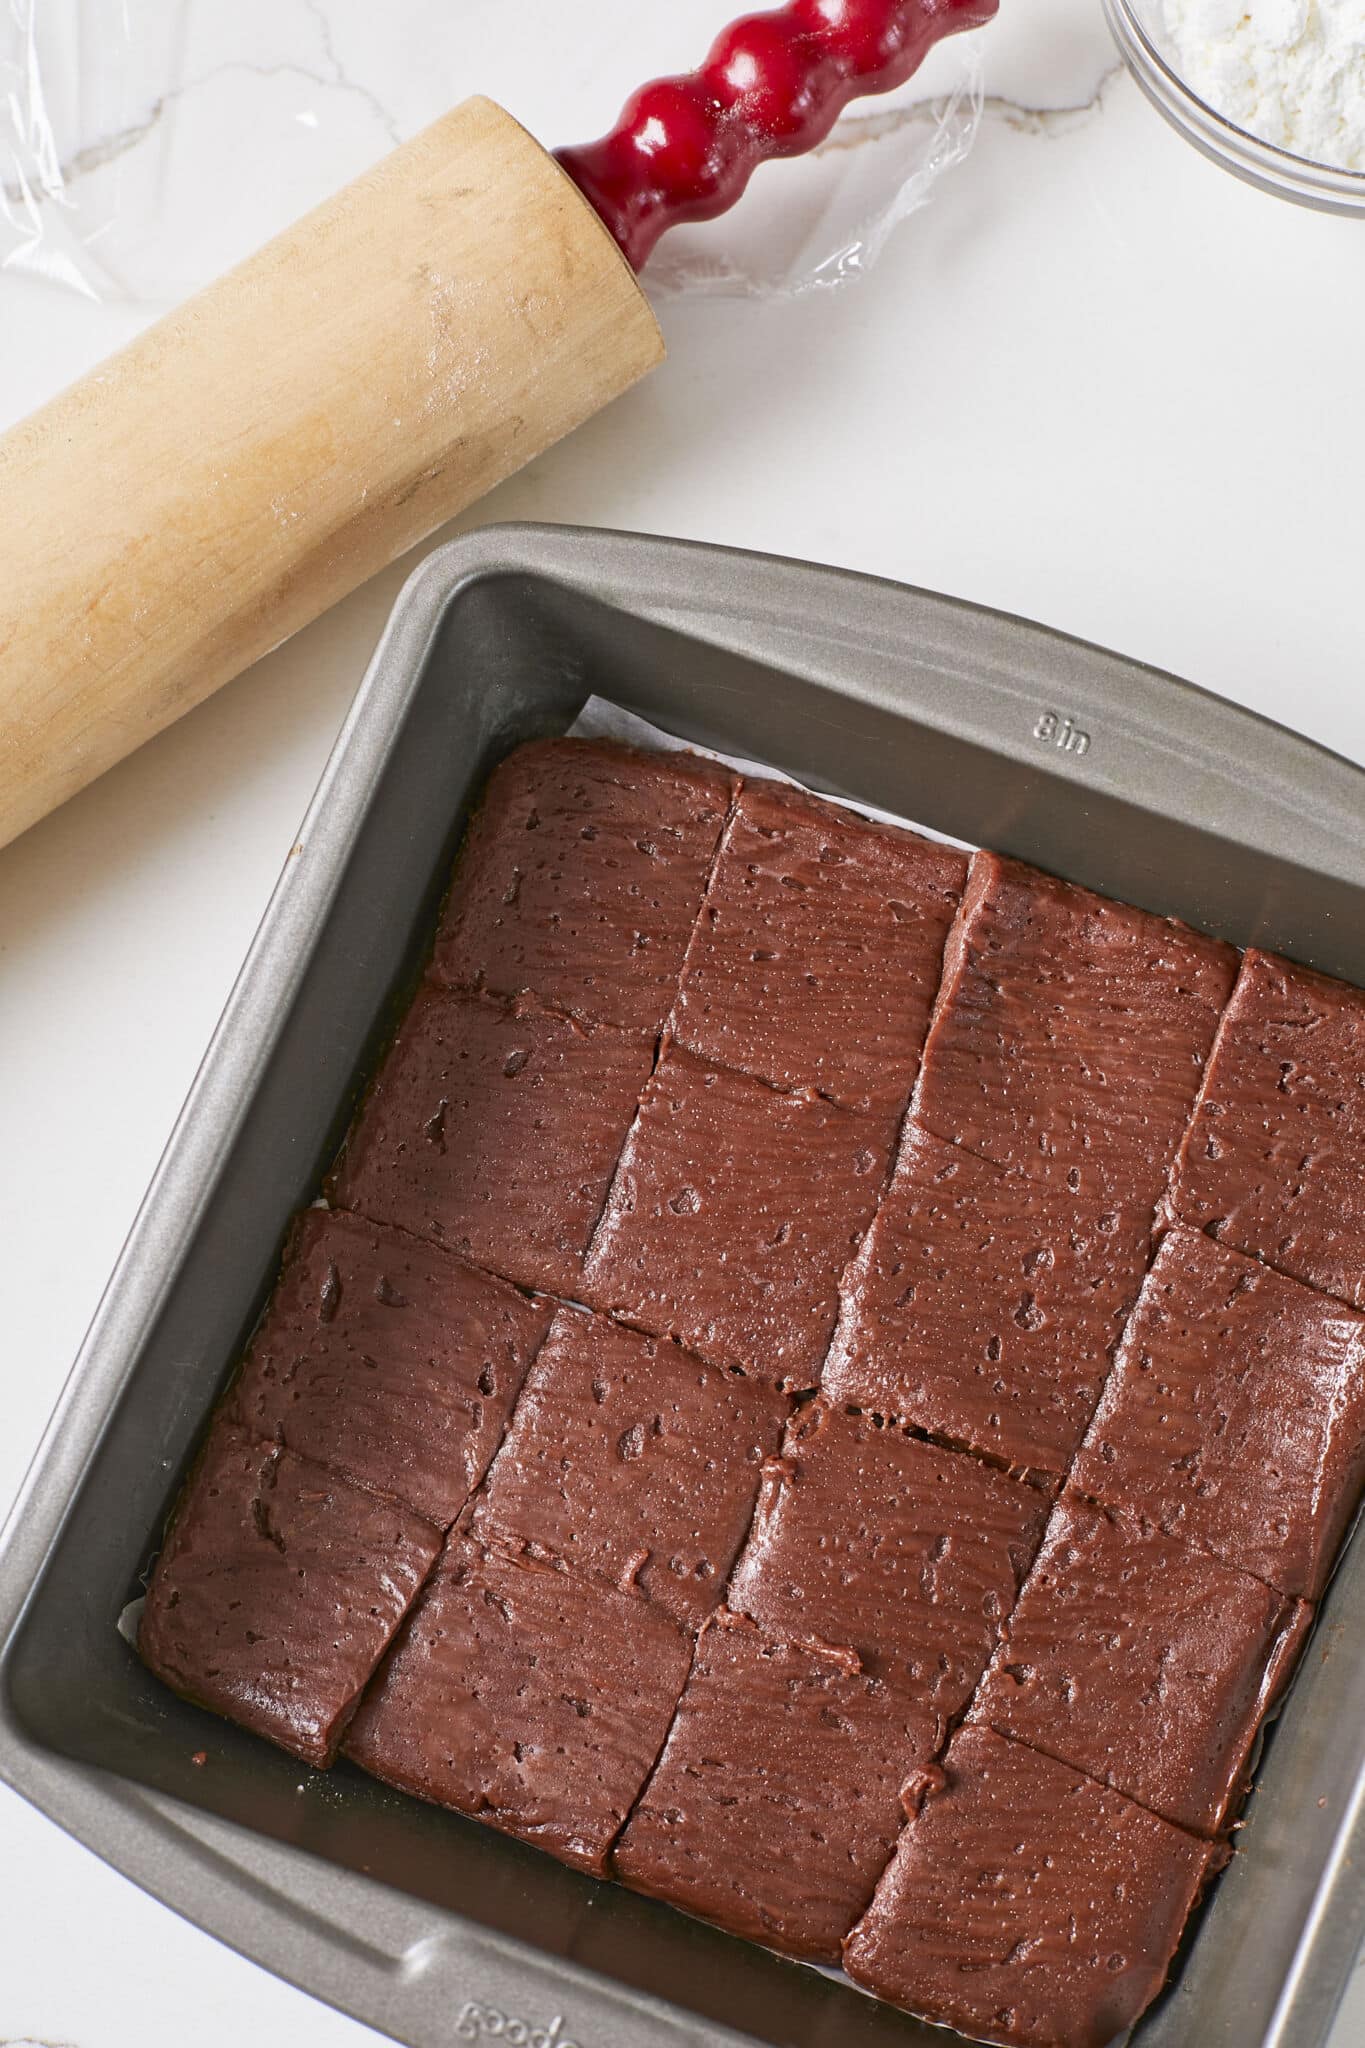 The brown batter was chilled in an 8 by 8 inch metal baking tray and cut into 16 squares. A wooden rolling pin with a red handle and a small glass bowl of cornstarch are placed on the side. 